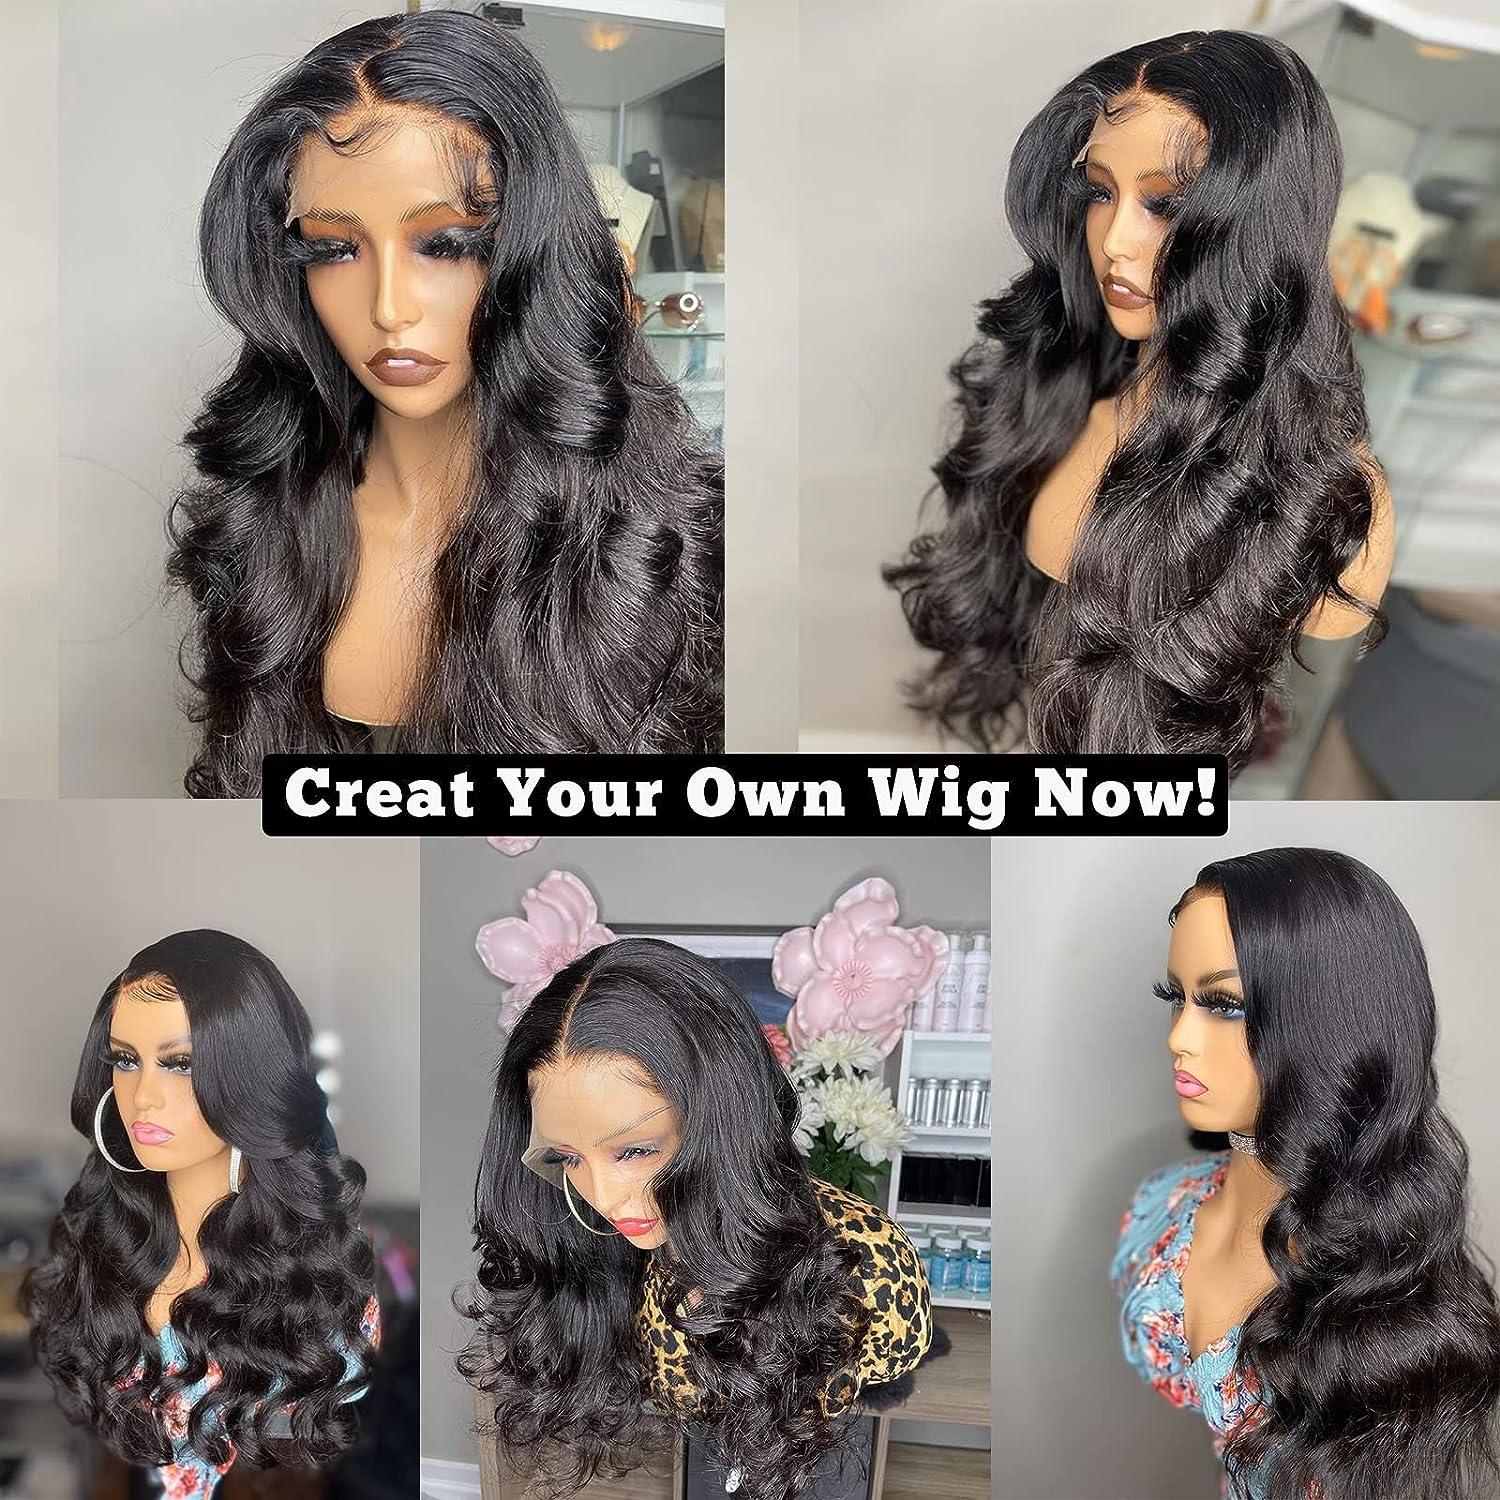 Choosing the Perfect Wig Construction: Ventilated Caps, Closed Weave C –  GLAMLIFE BEAUTY